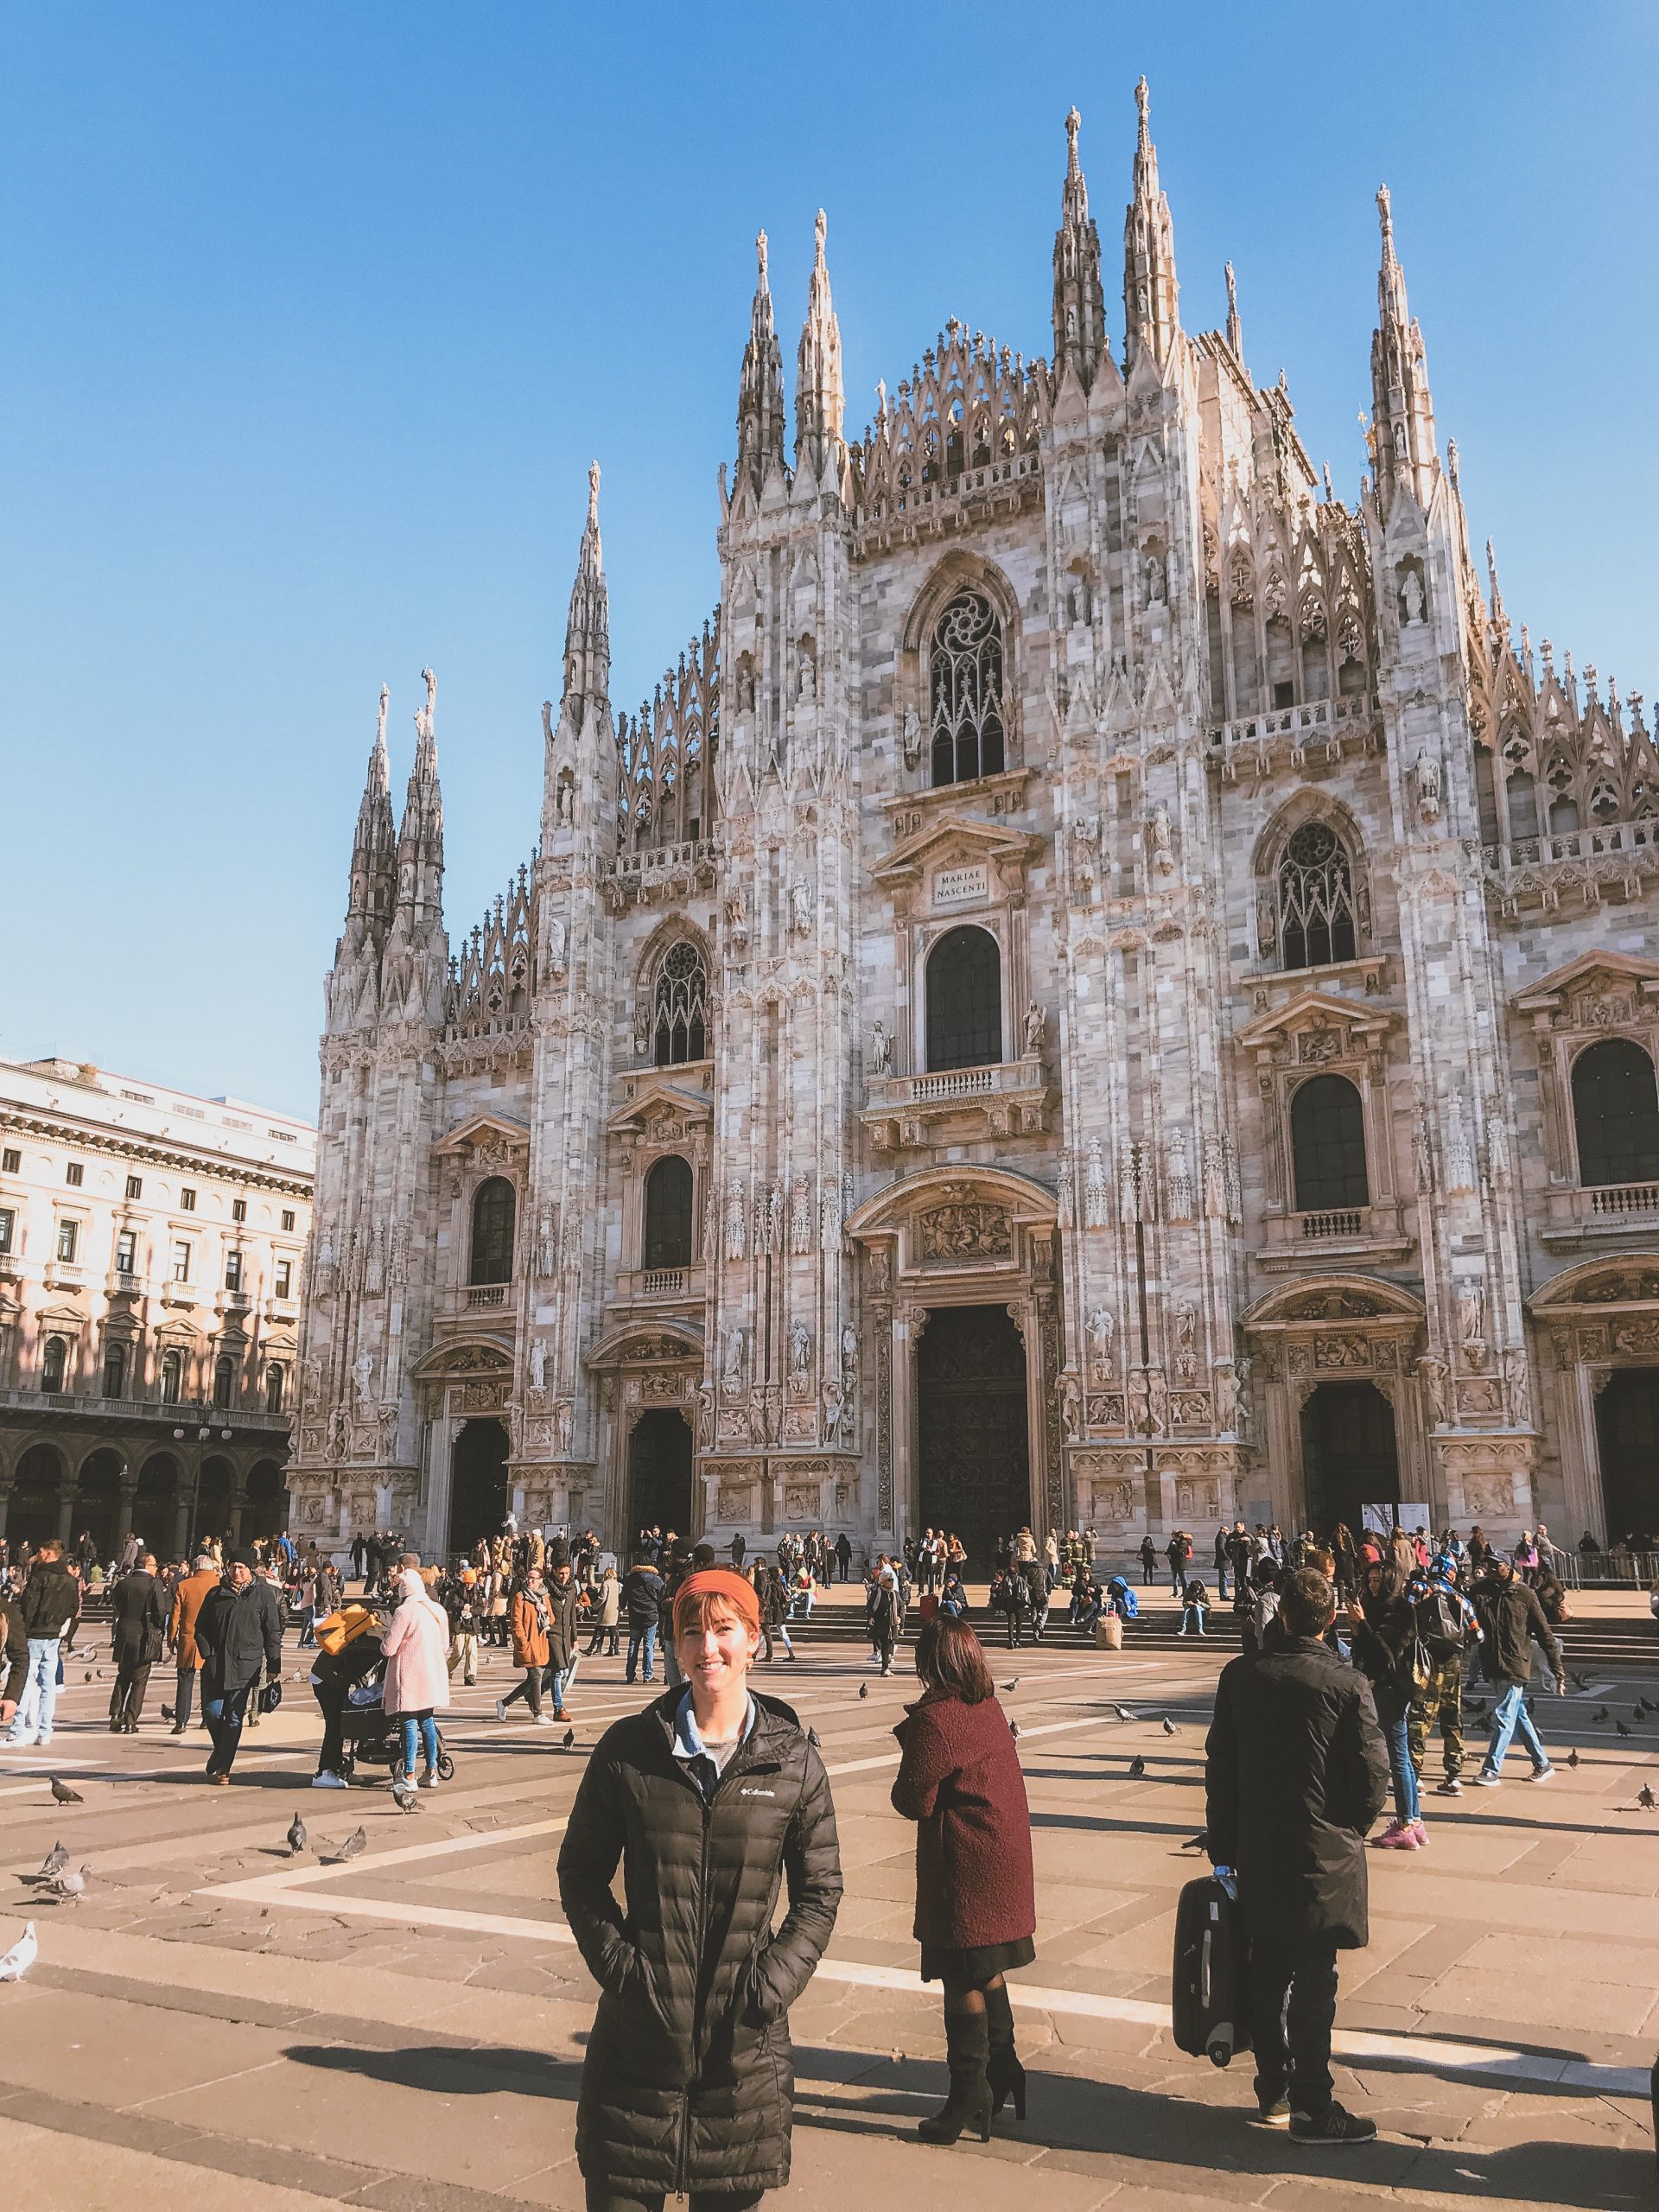 Girl standing in front of the Duomo in Milan, Italy.